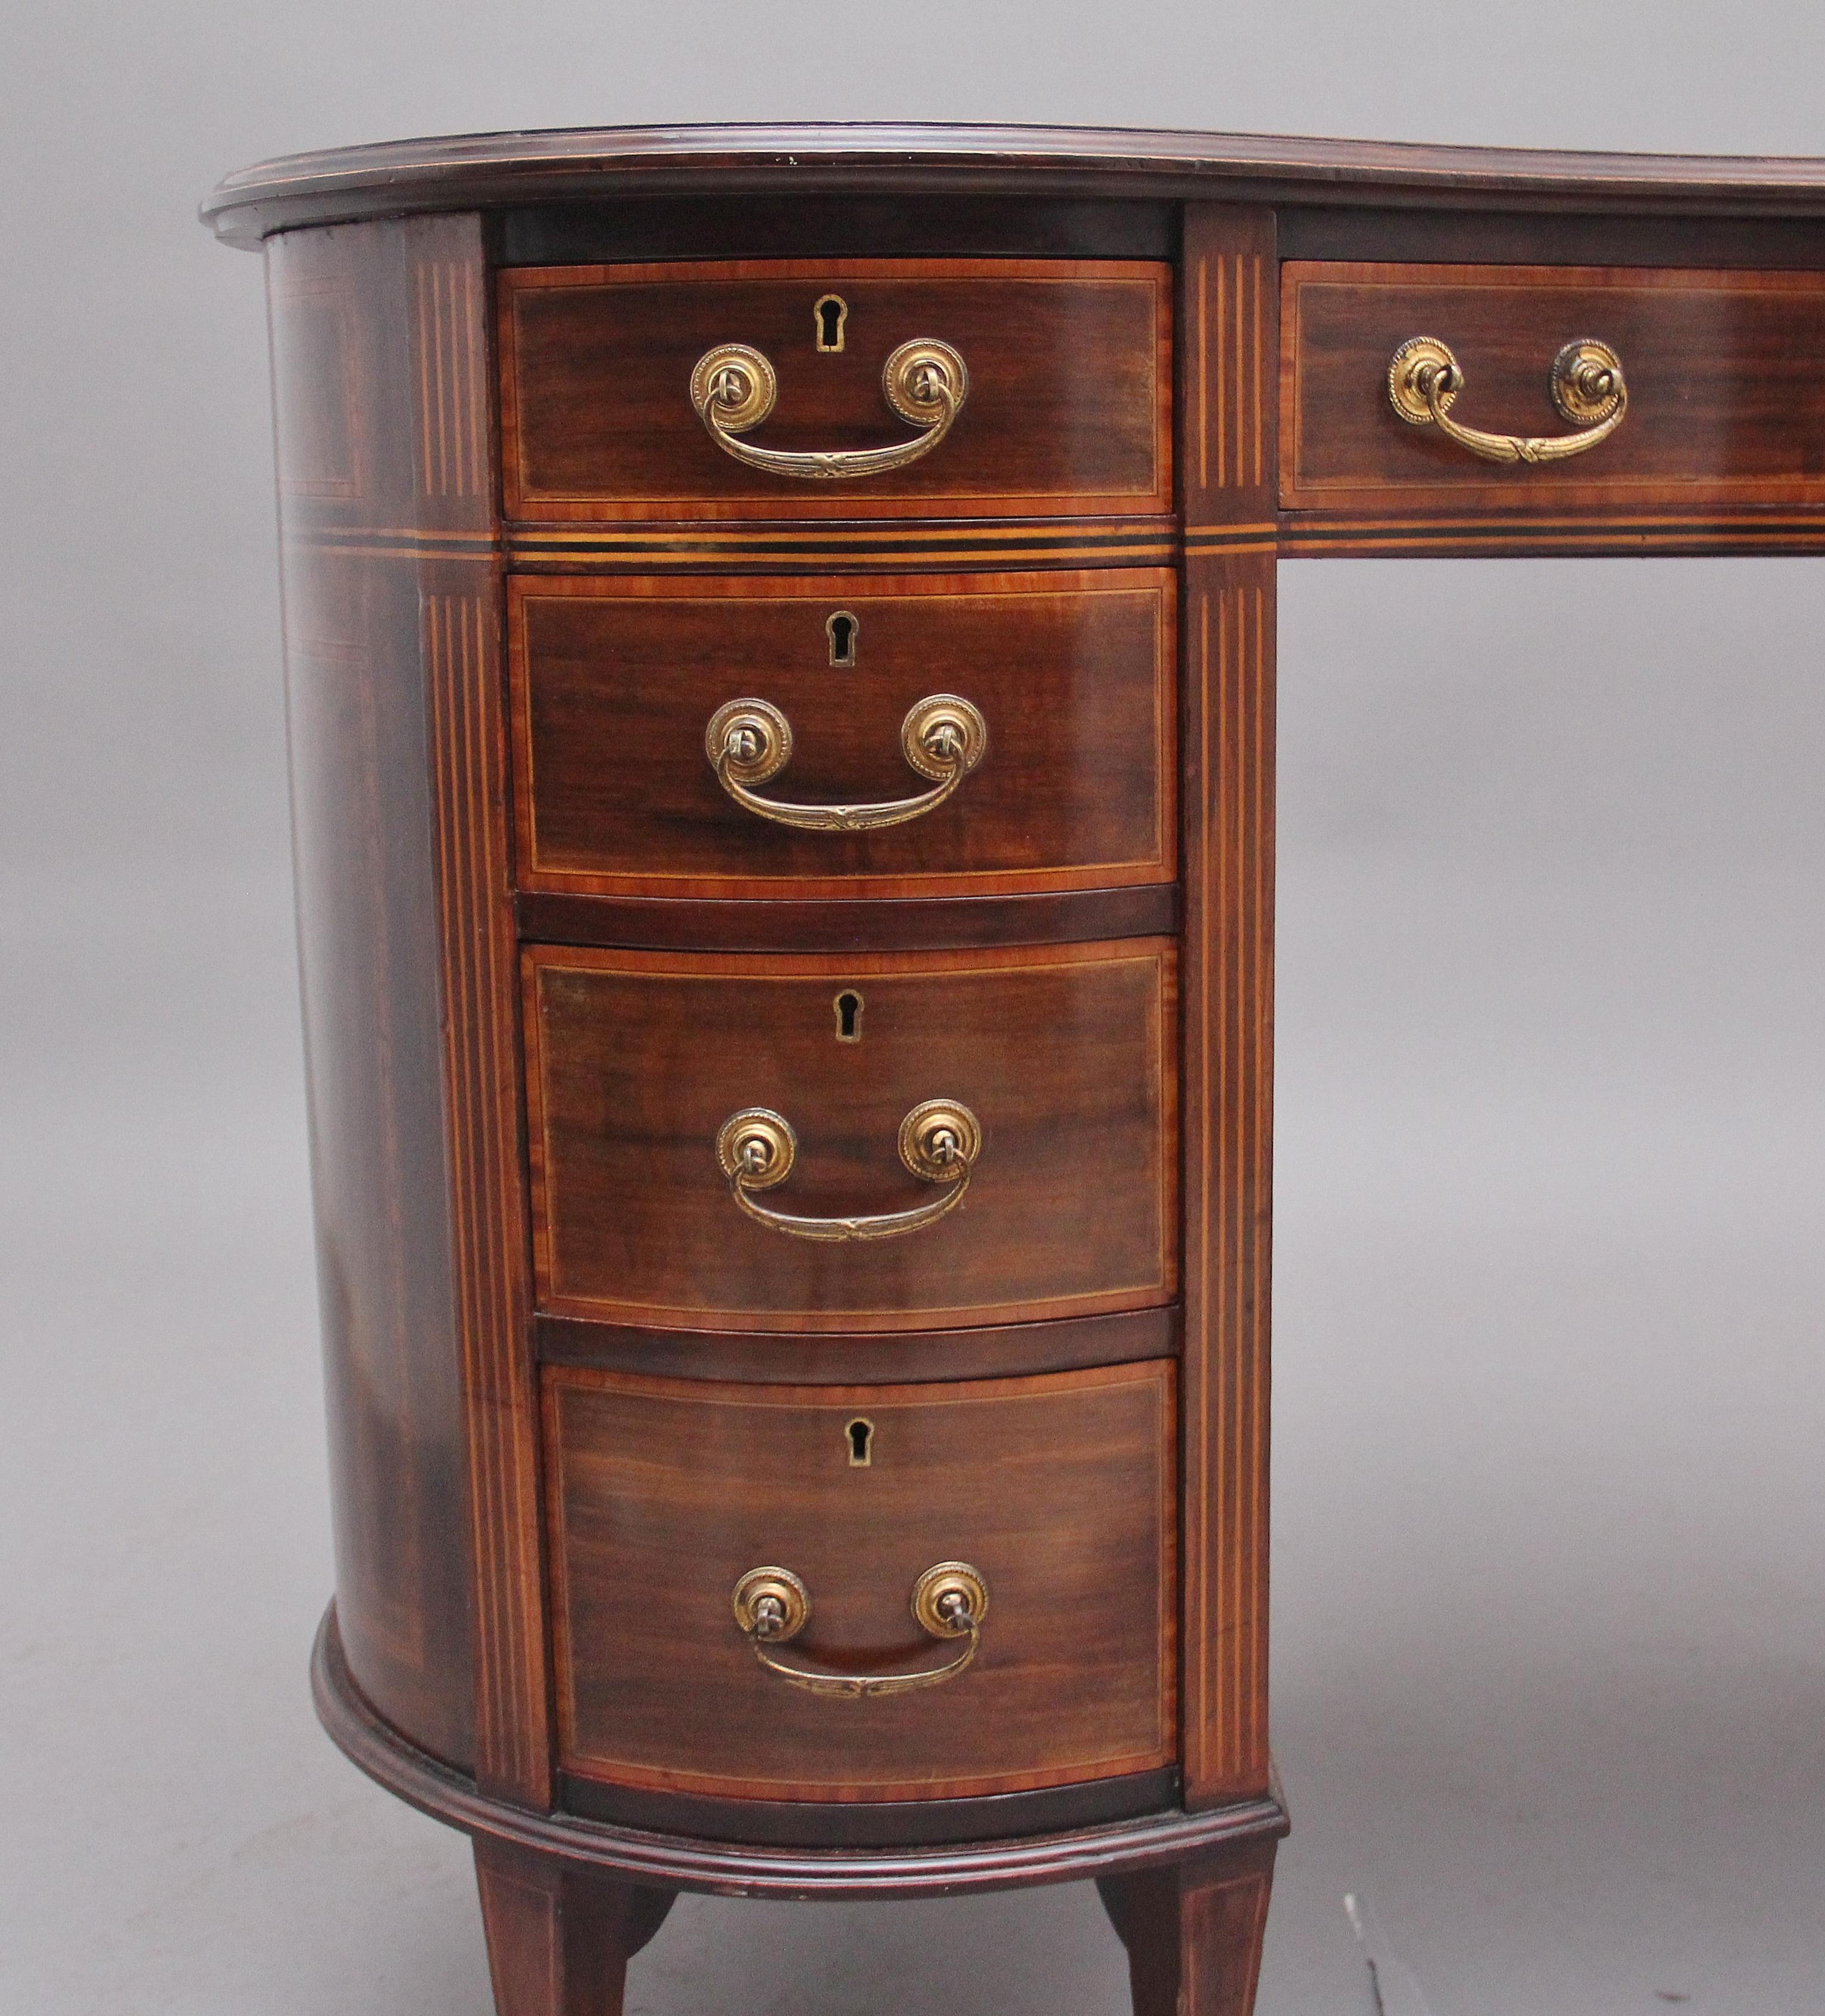 19th Century Inlaid Mahogany Kidney Shaped Desk In Good Condition For Sale In Martlesham, GB